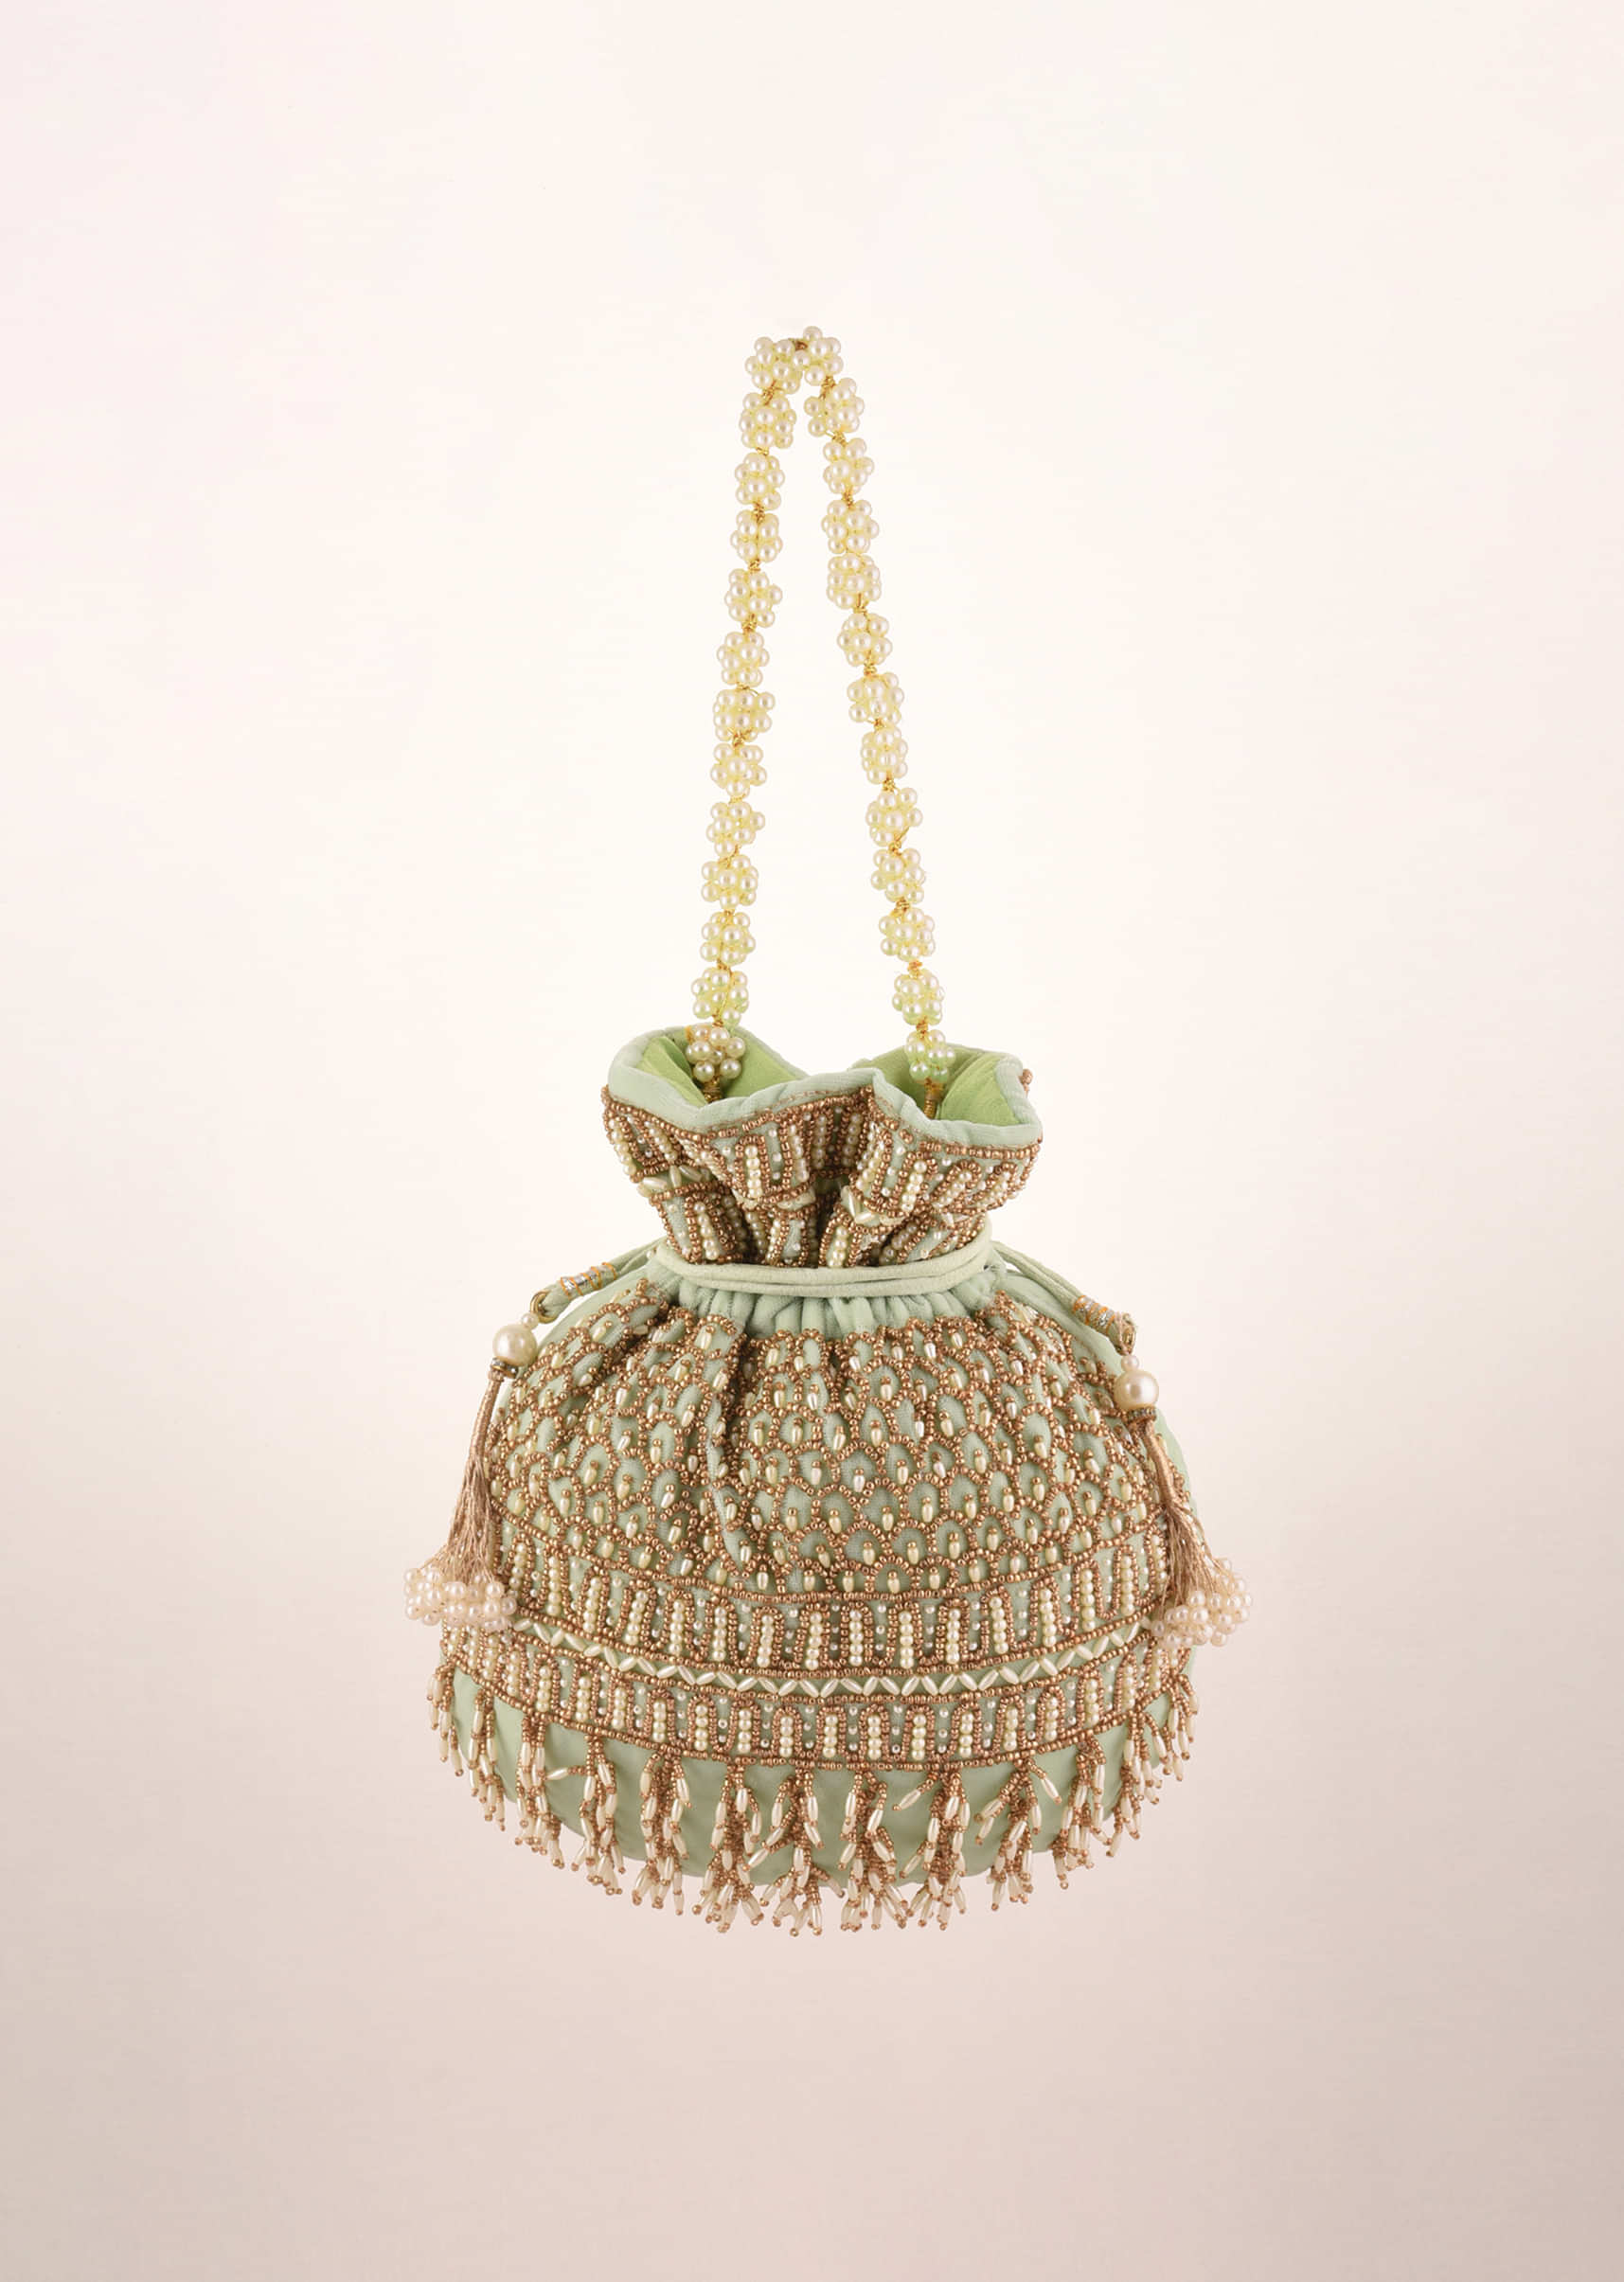 Pista Green Potli In Velvet Heavily Embroidered With Beads And Moti Work In Scalloped And Tassel